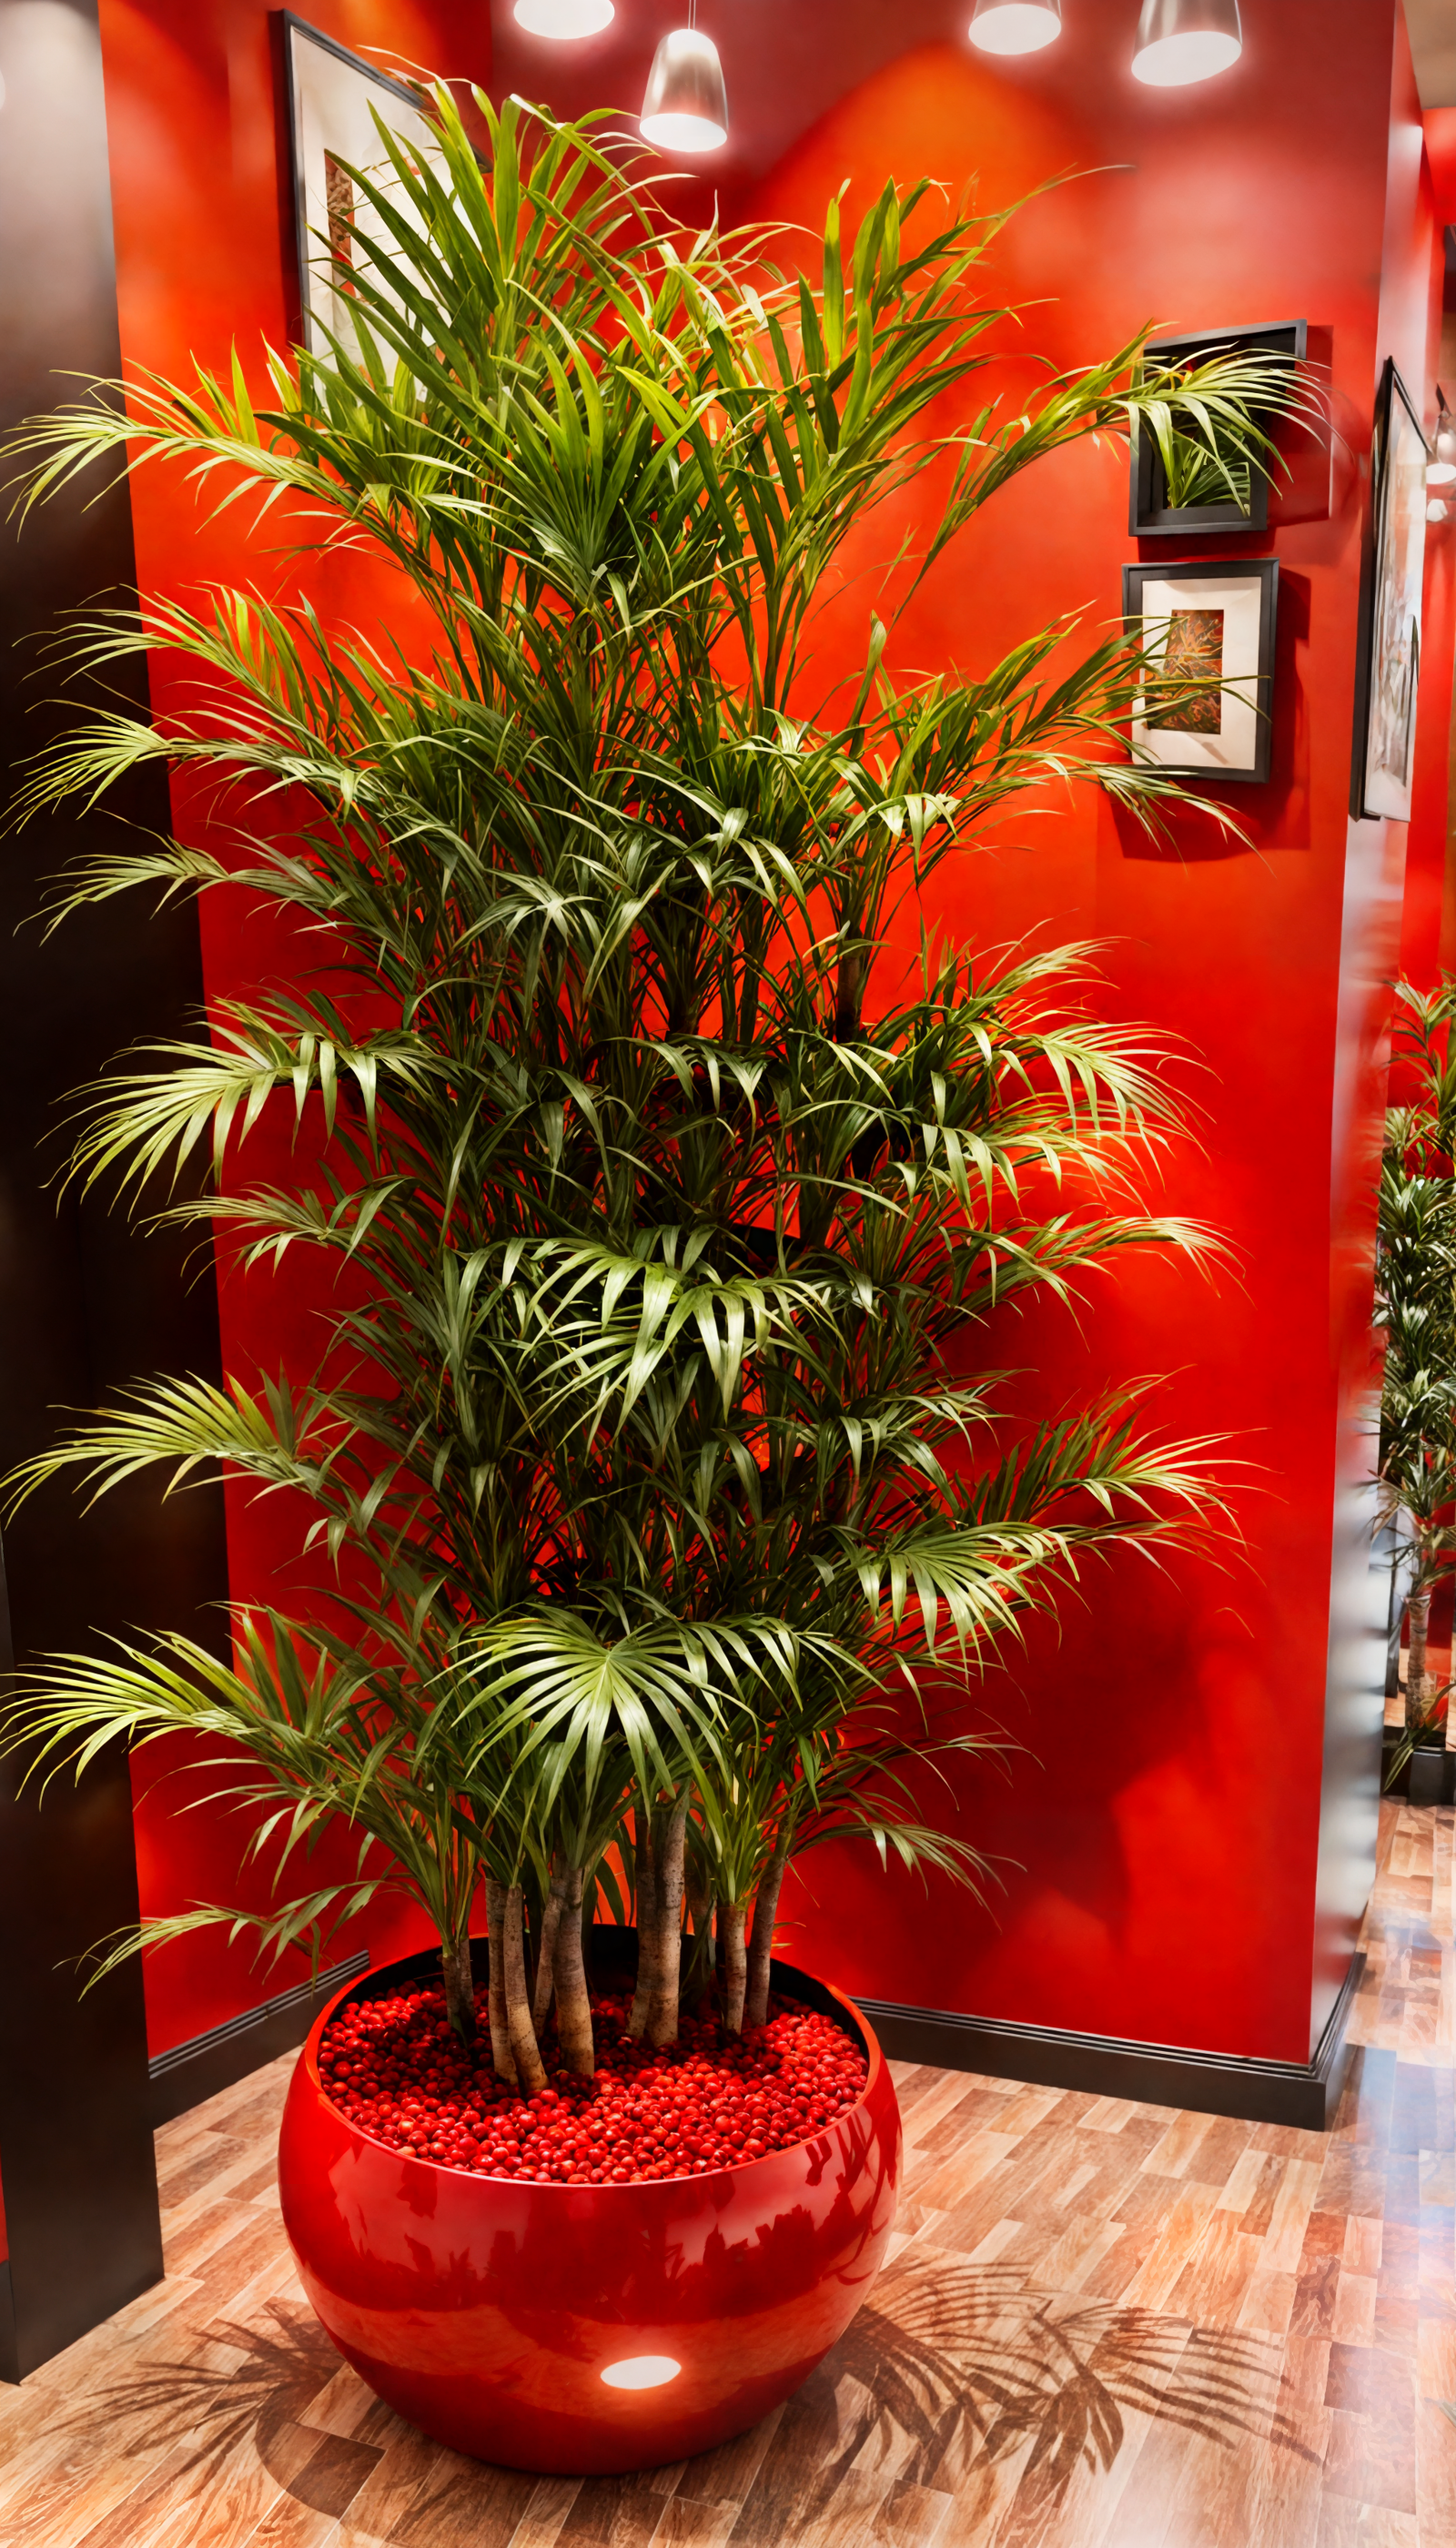 Dypsis lutescens in a red vase on a wooden floor against a red wall, clear lighting, industrial decor.